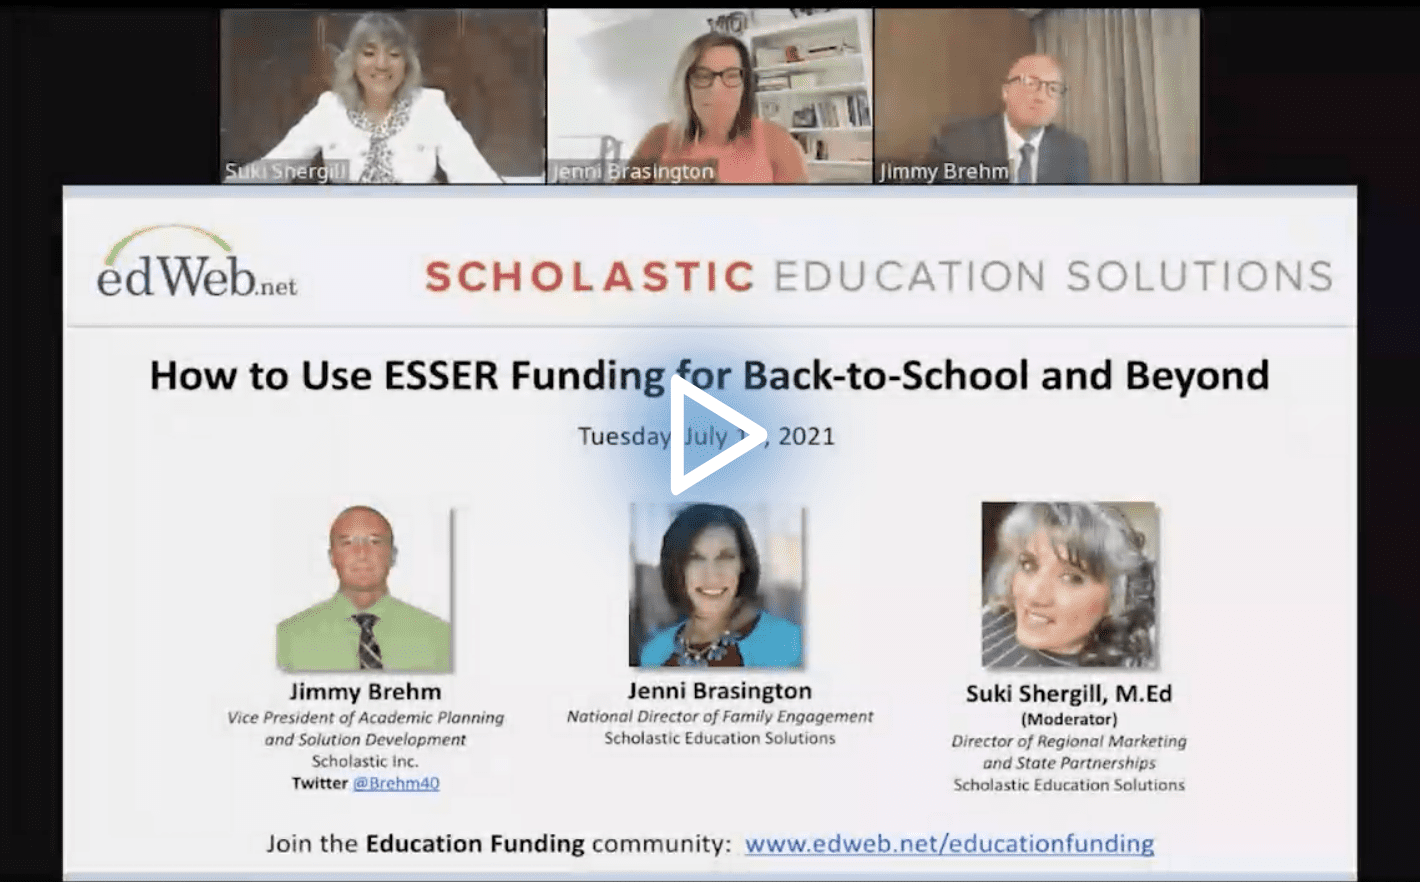 How to Use ESSER Funding for Back-to-School and Beyond edLeader Panel recording link